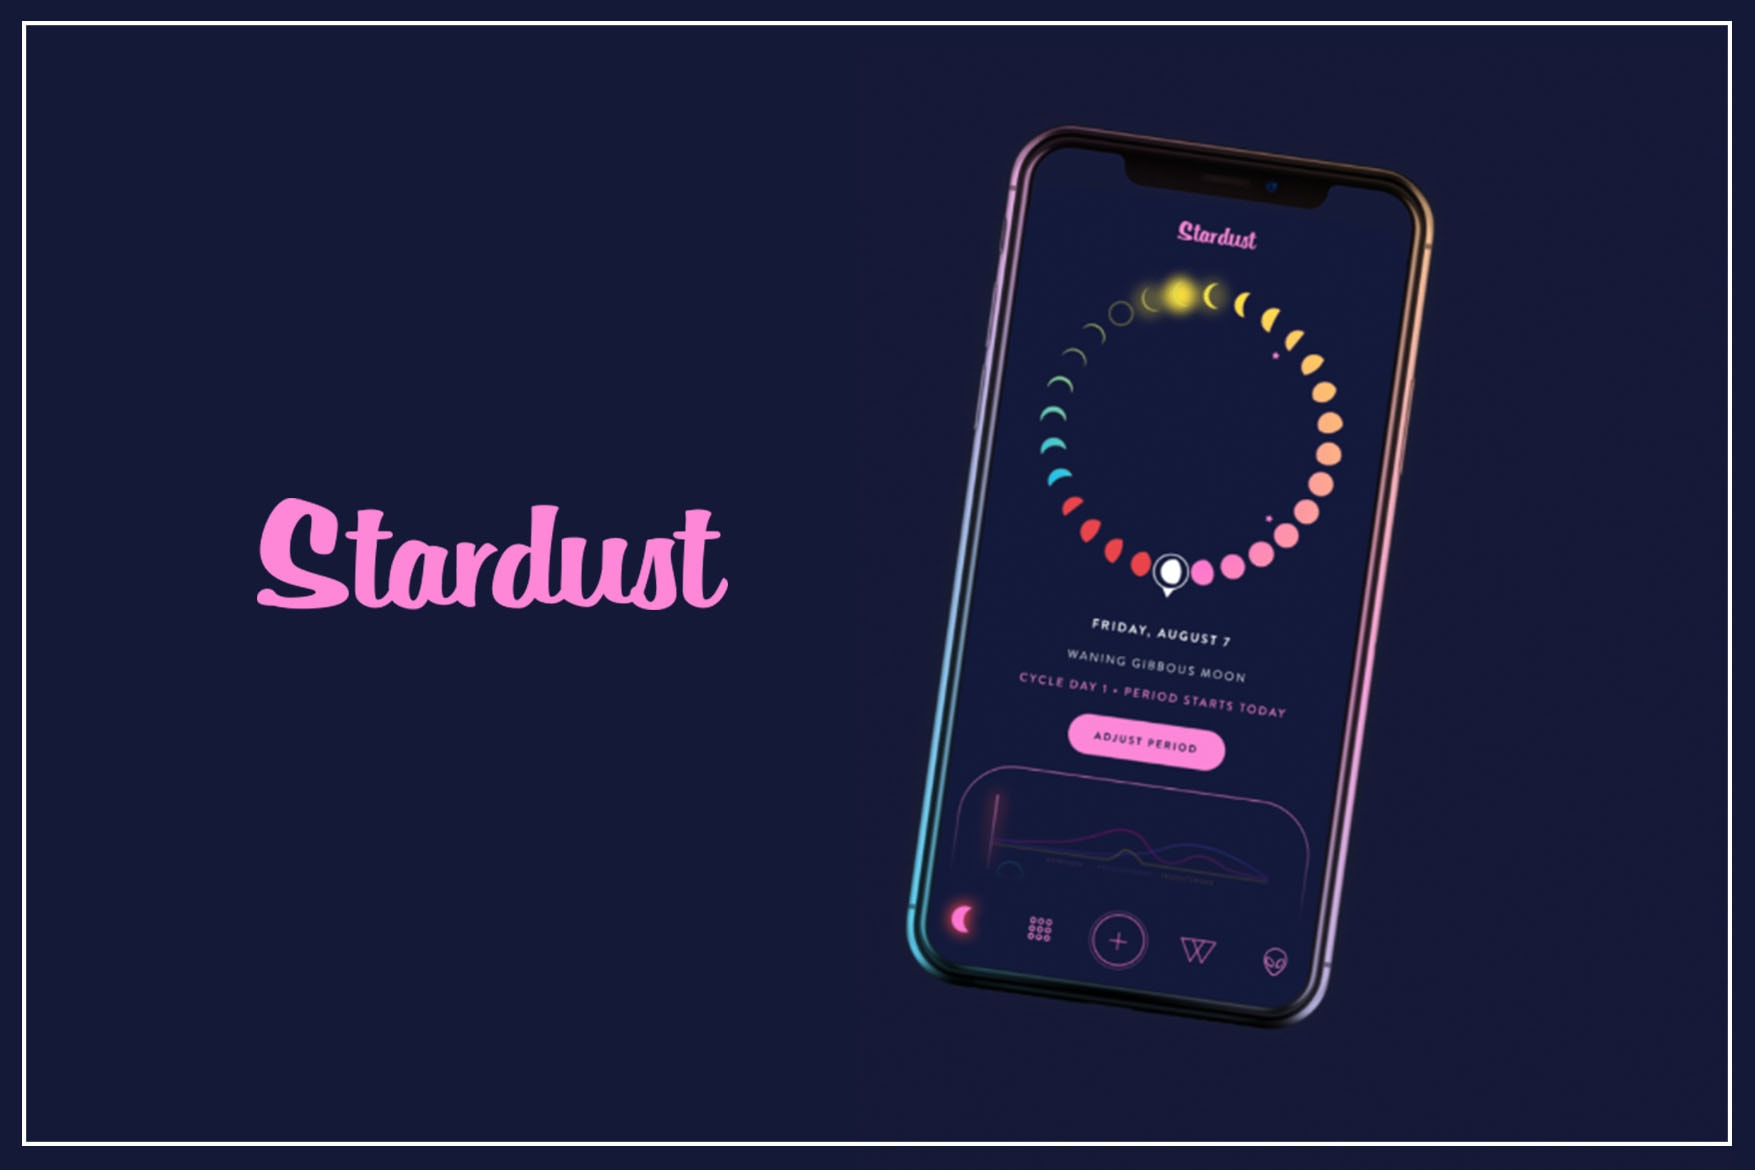 stardust period tracker horoscope astronomy astrology mobile apps menstrual care cycle